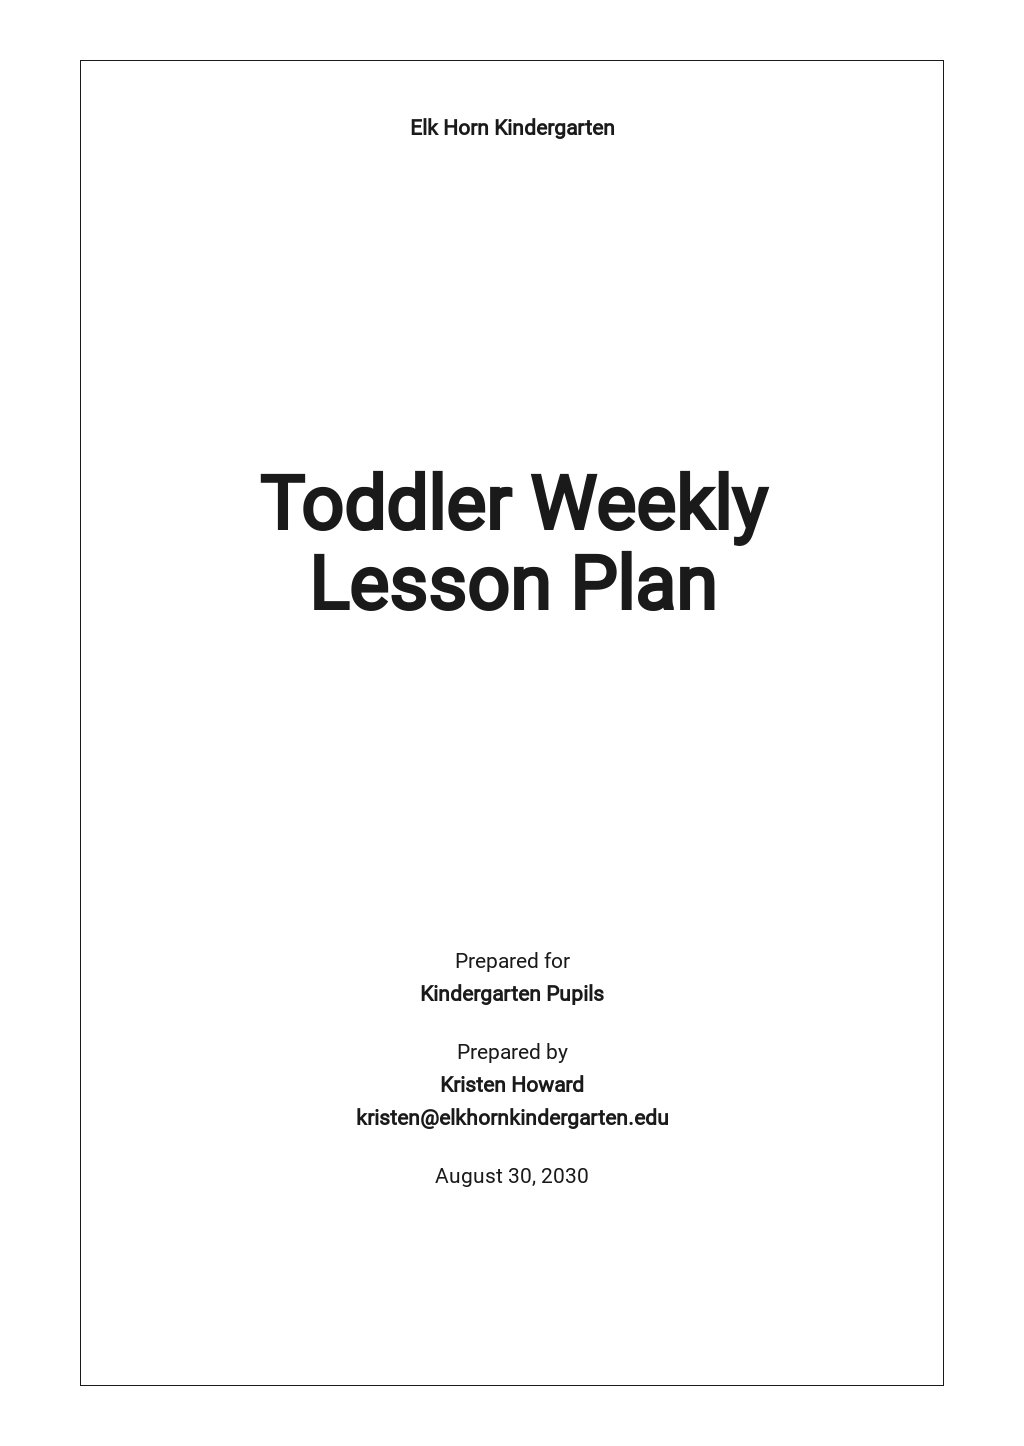 google docs weekly lesson plan template